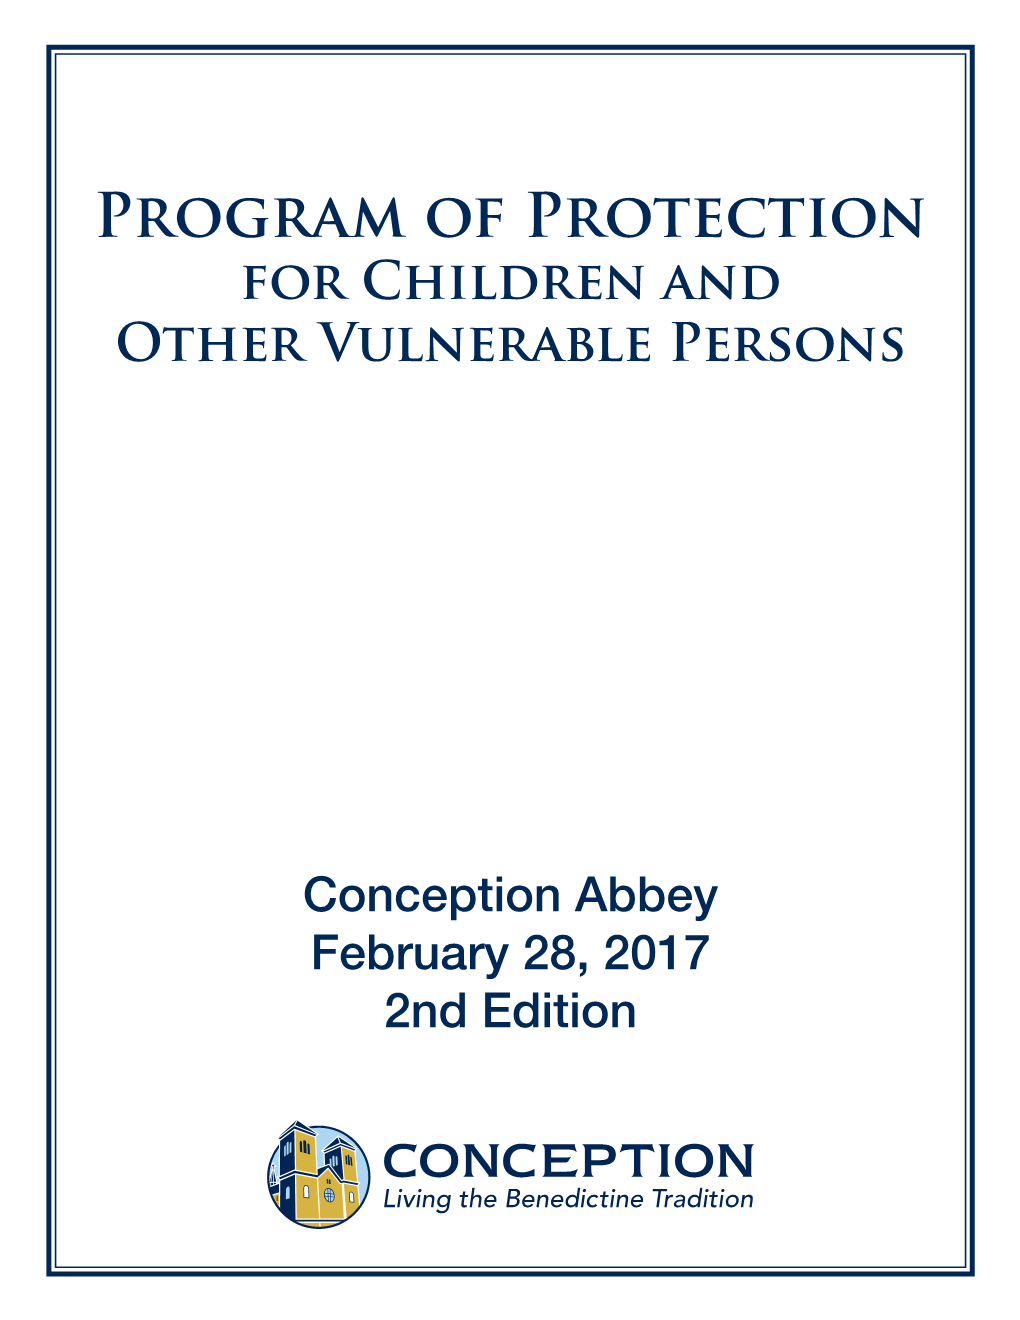 Program of Protection for Children and Other Vulnerable Persons